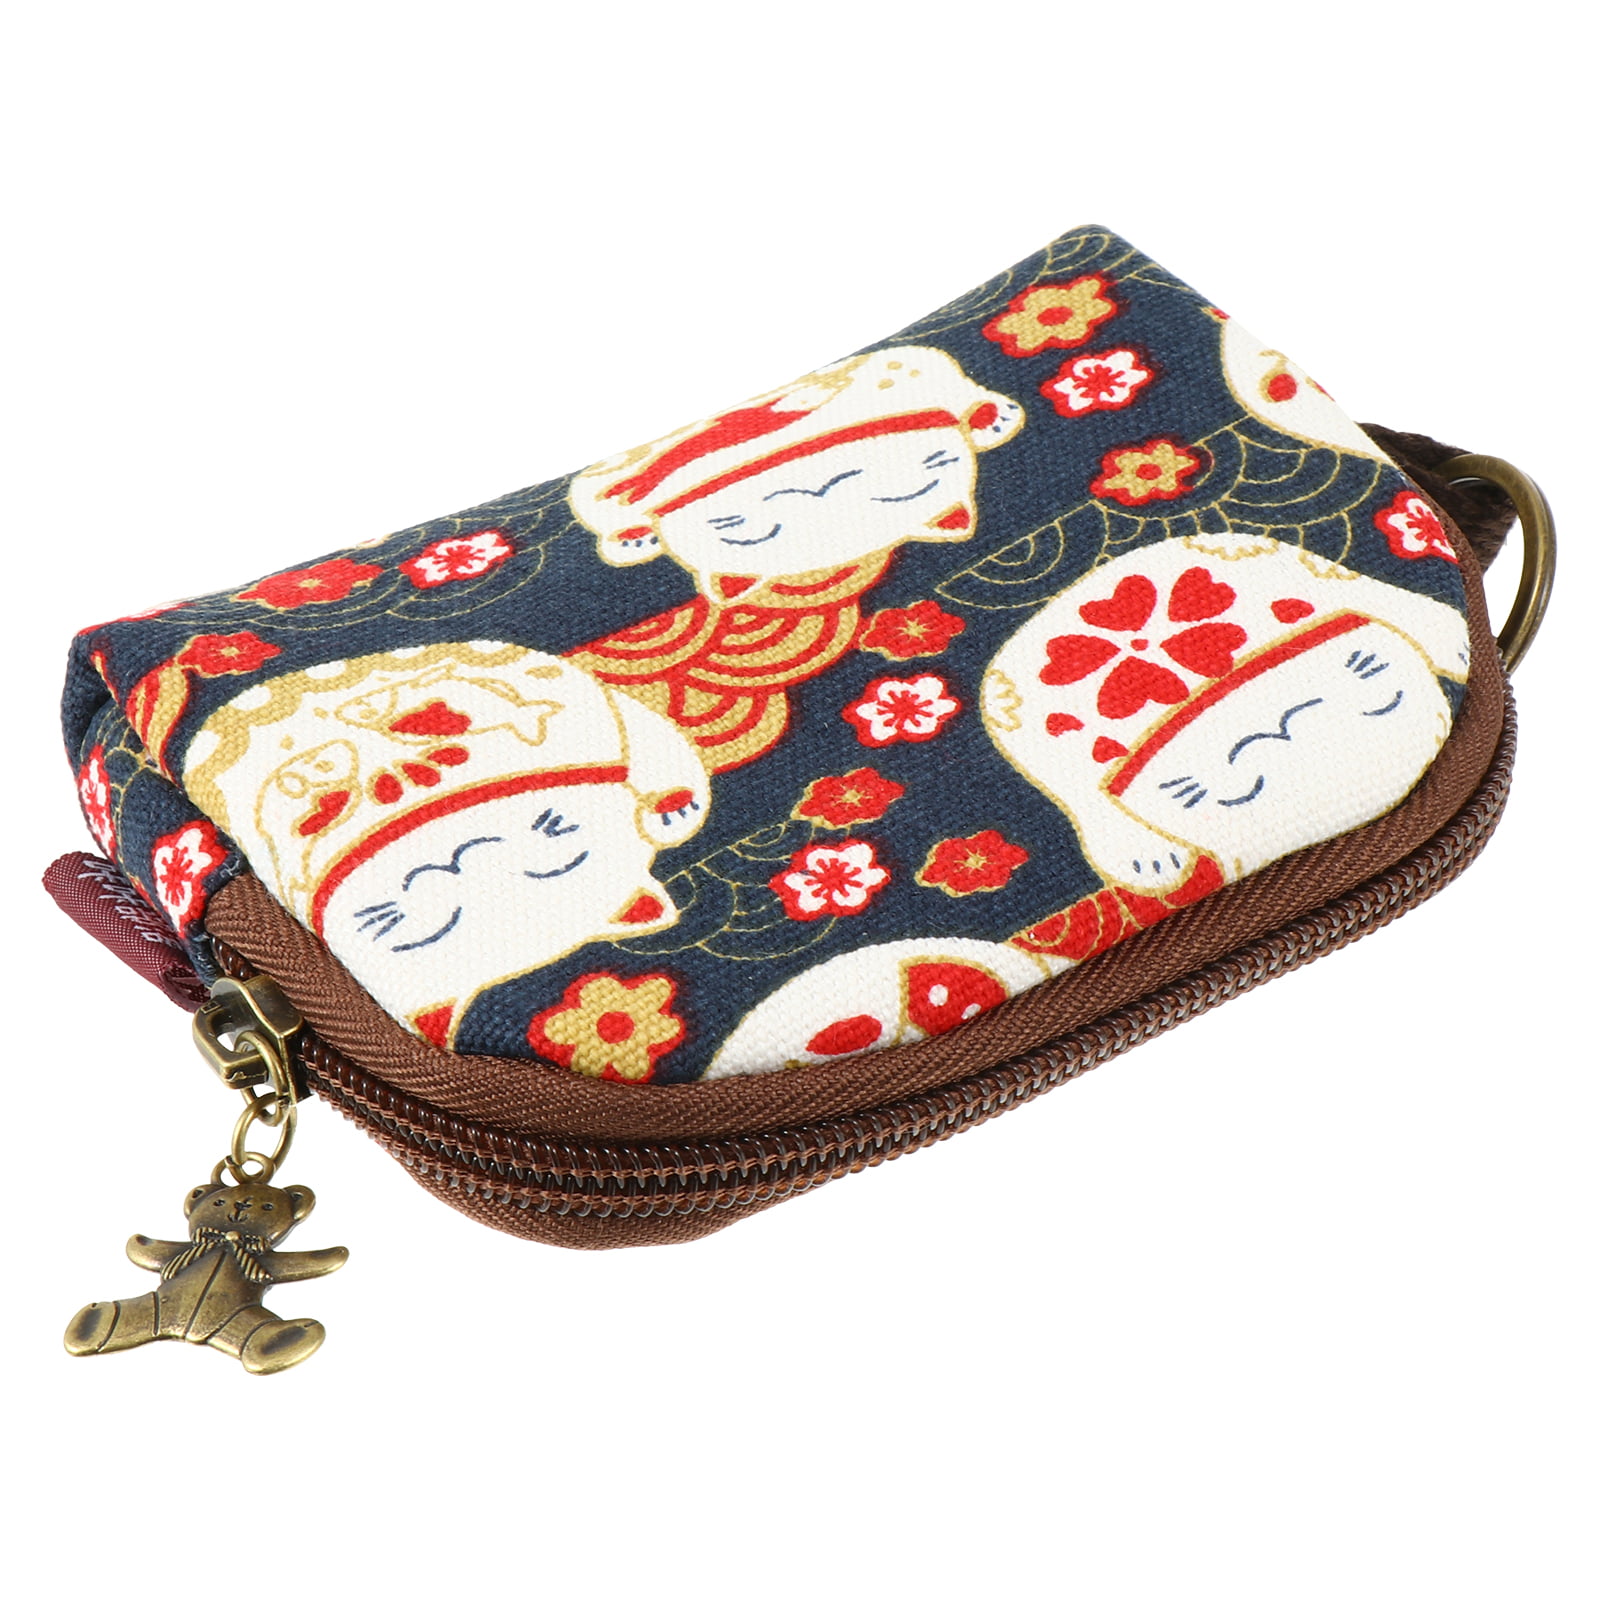 Lot 5 ea. 8” New with Tag Hato ☆ Hasi Walmart Coin Purse and Wallet | eBay